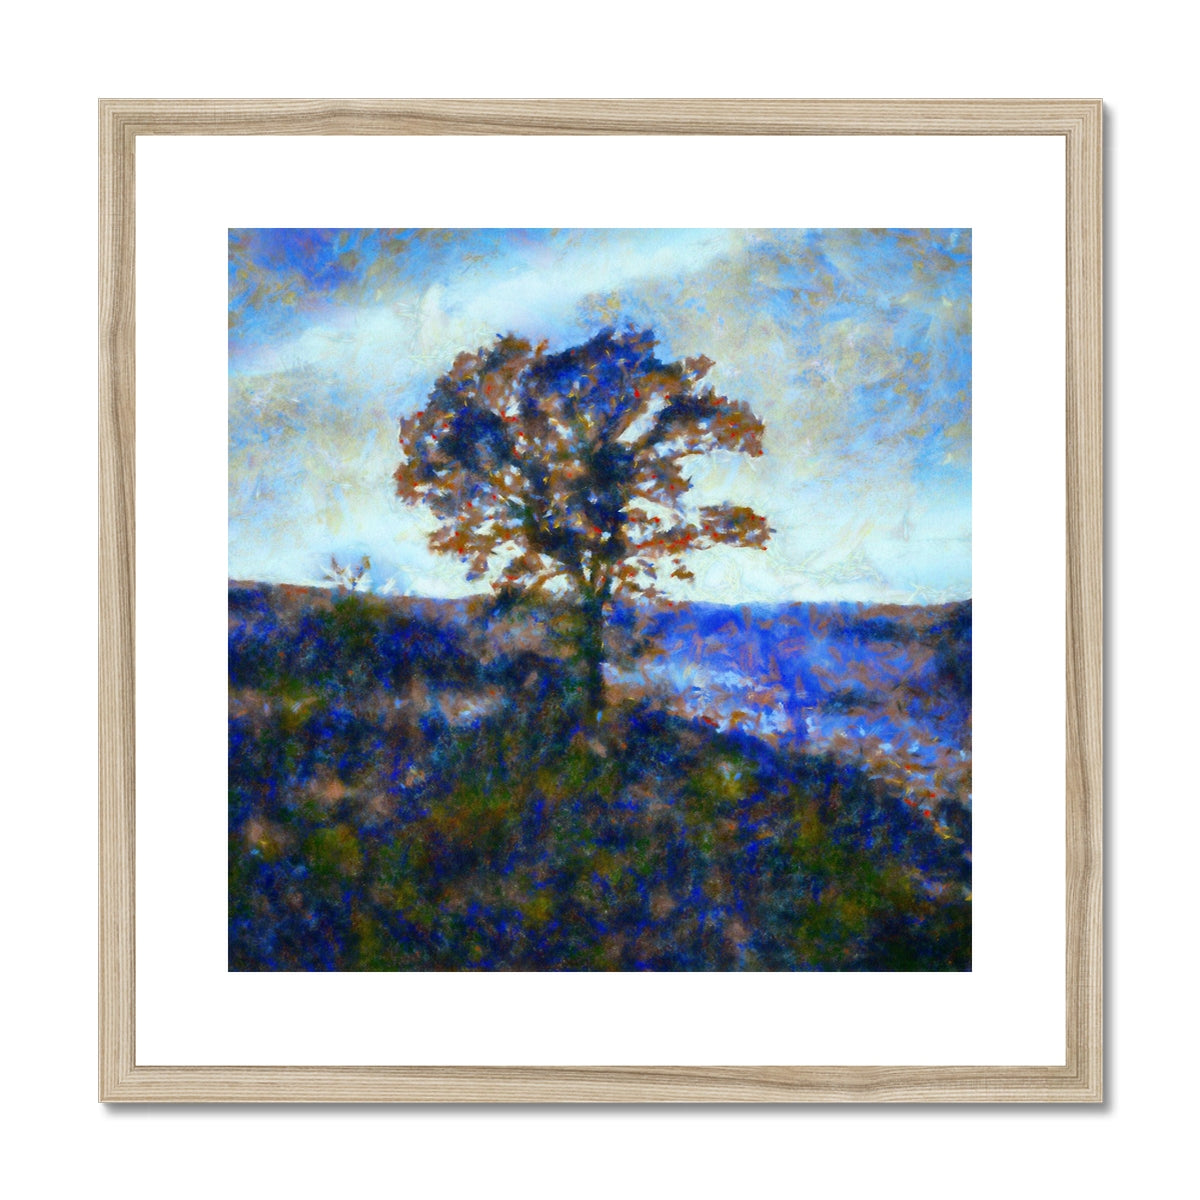 A Winter Highland Tree Painting | Framed & Mounted Prints From Scotland-Framed & Mounted Prints-Scottish Highlands & Lowlands Art Gallery-20"x20"-Natural Frame-Paintings, Prints, Homeware, Art Gifts From Scotland By Scottish Artist Kevin Hunter